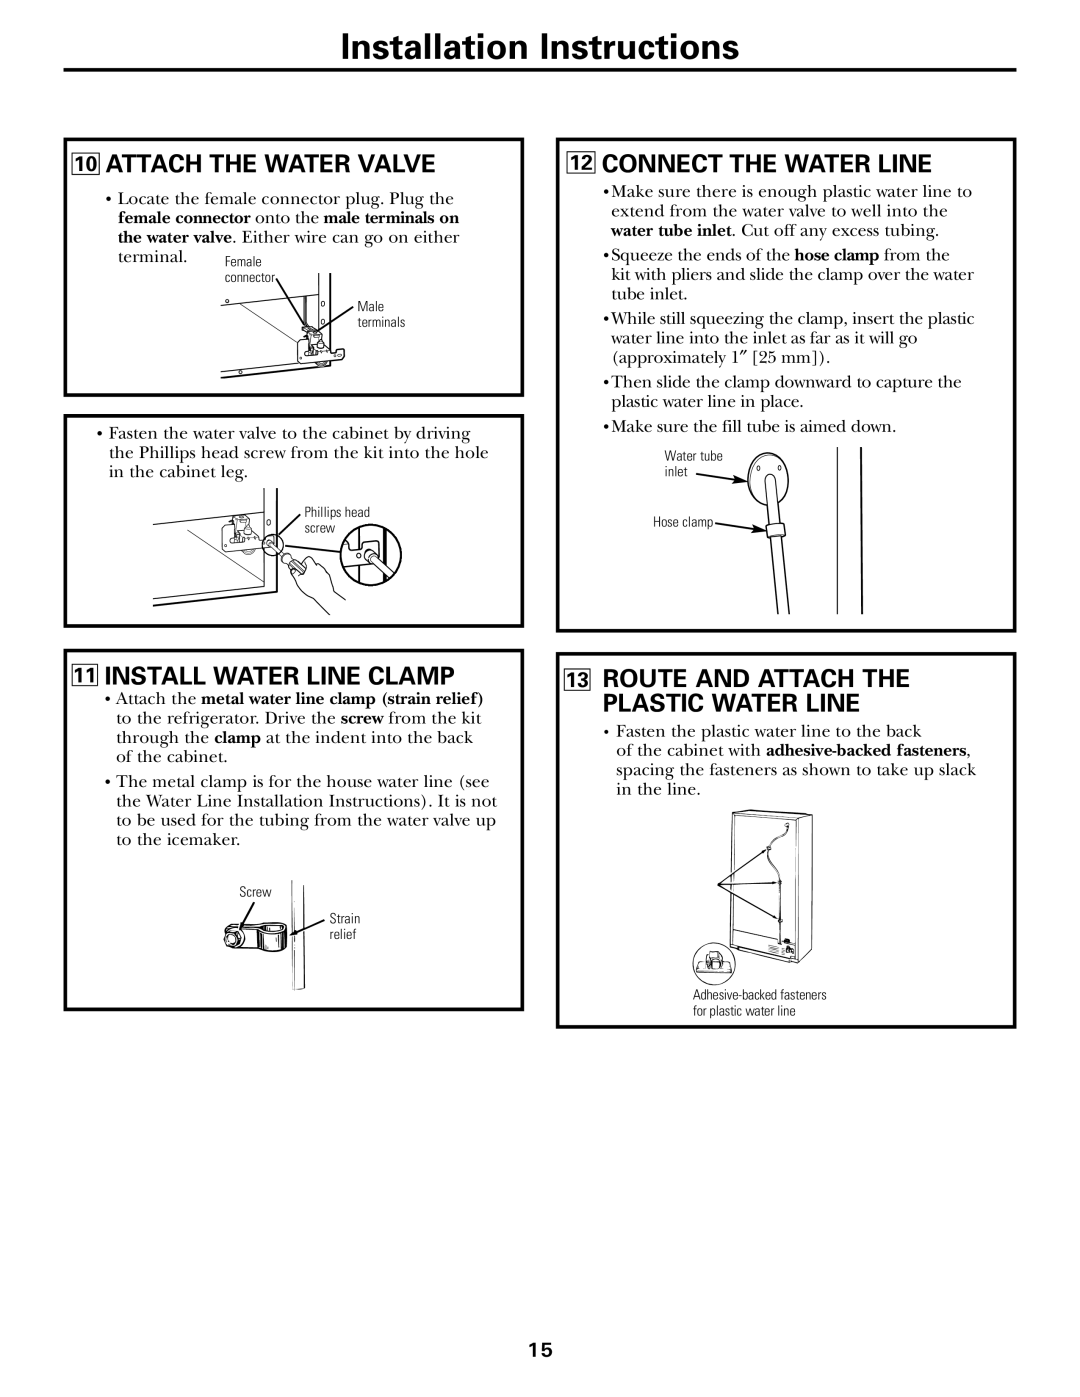 GE GTH21, GTL21 Installation Instructions, Attach The Water Valve, Connect The Water Line, Install Water Line Clamp 